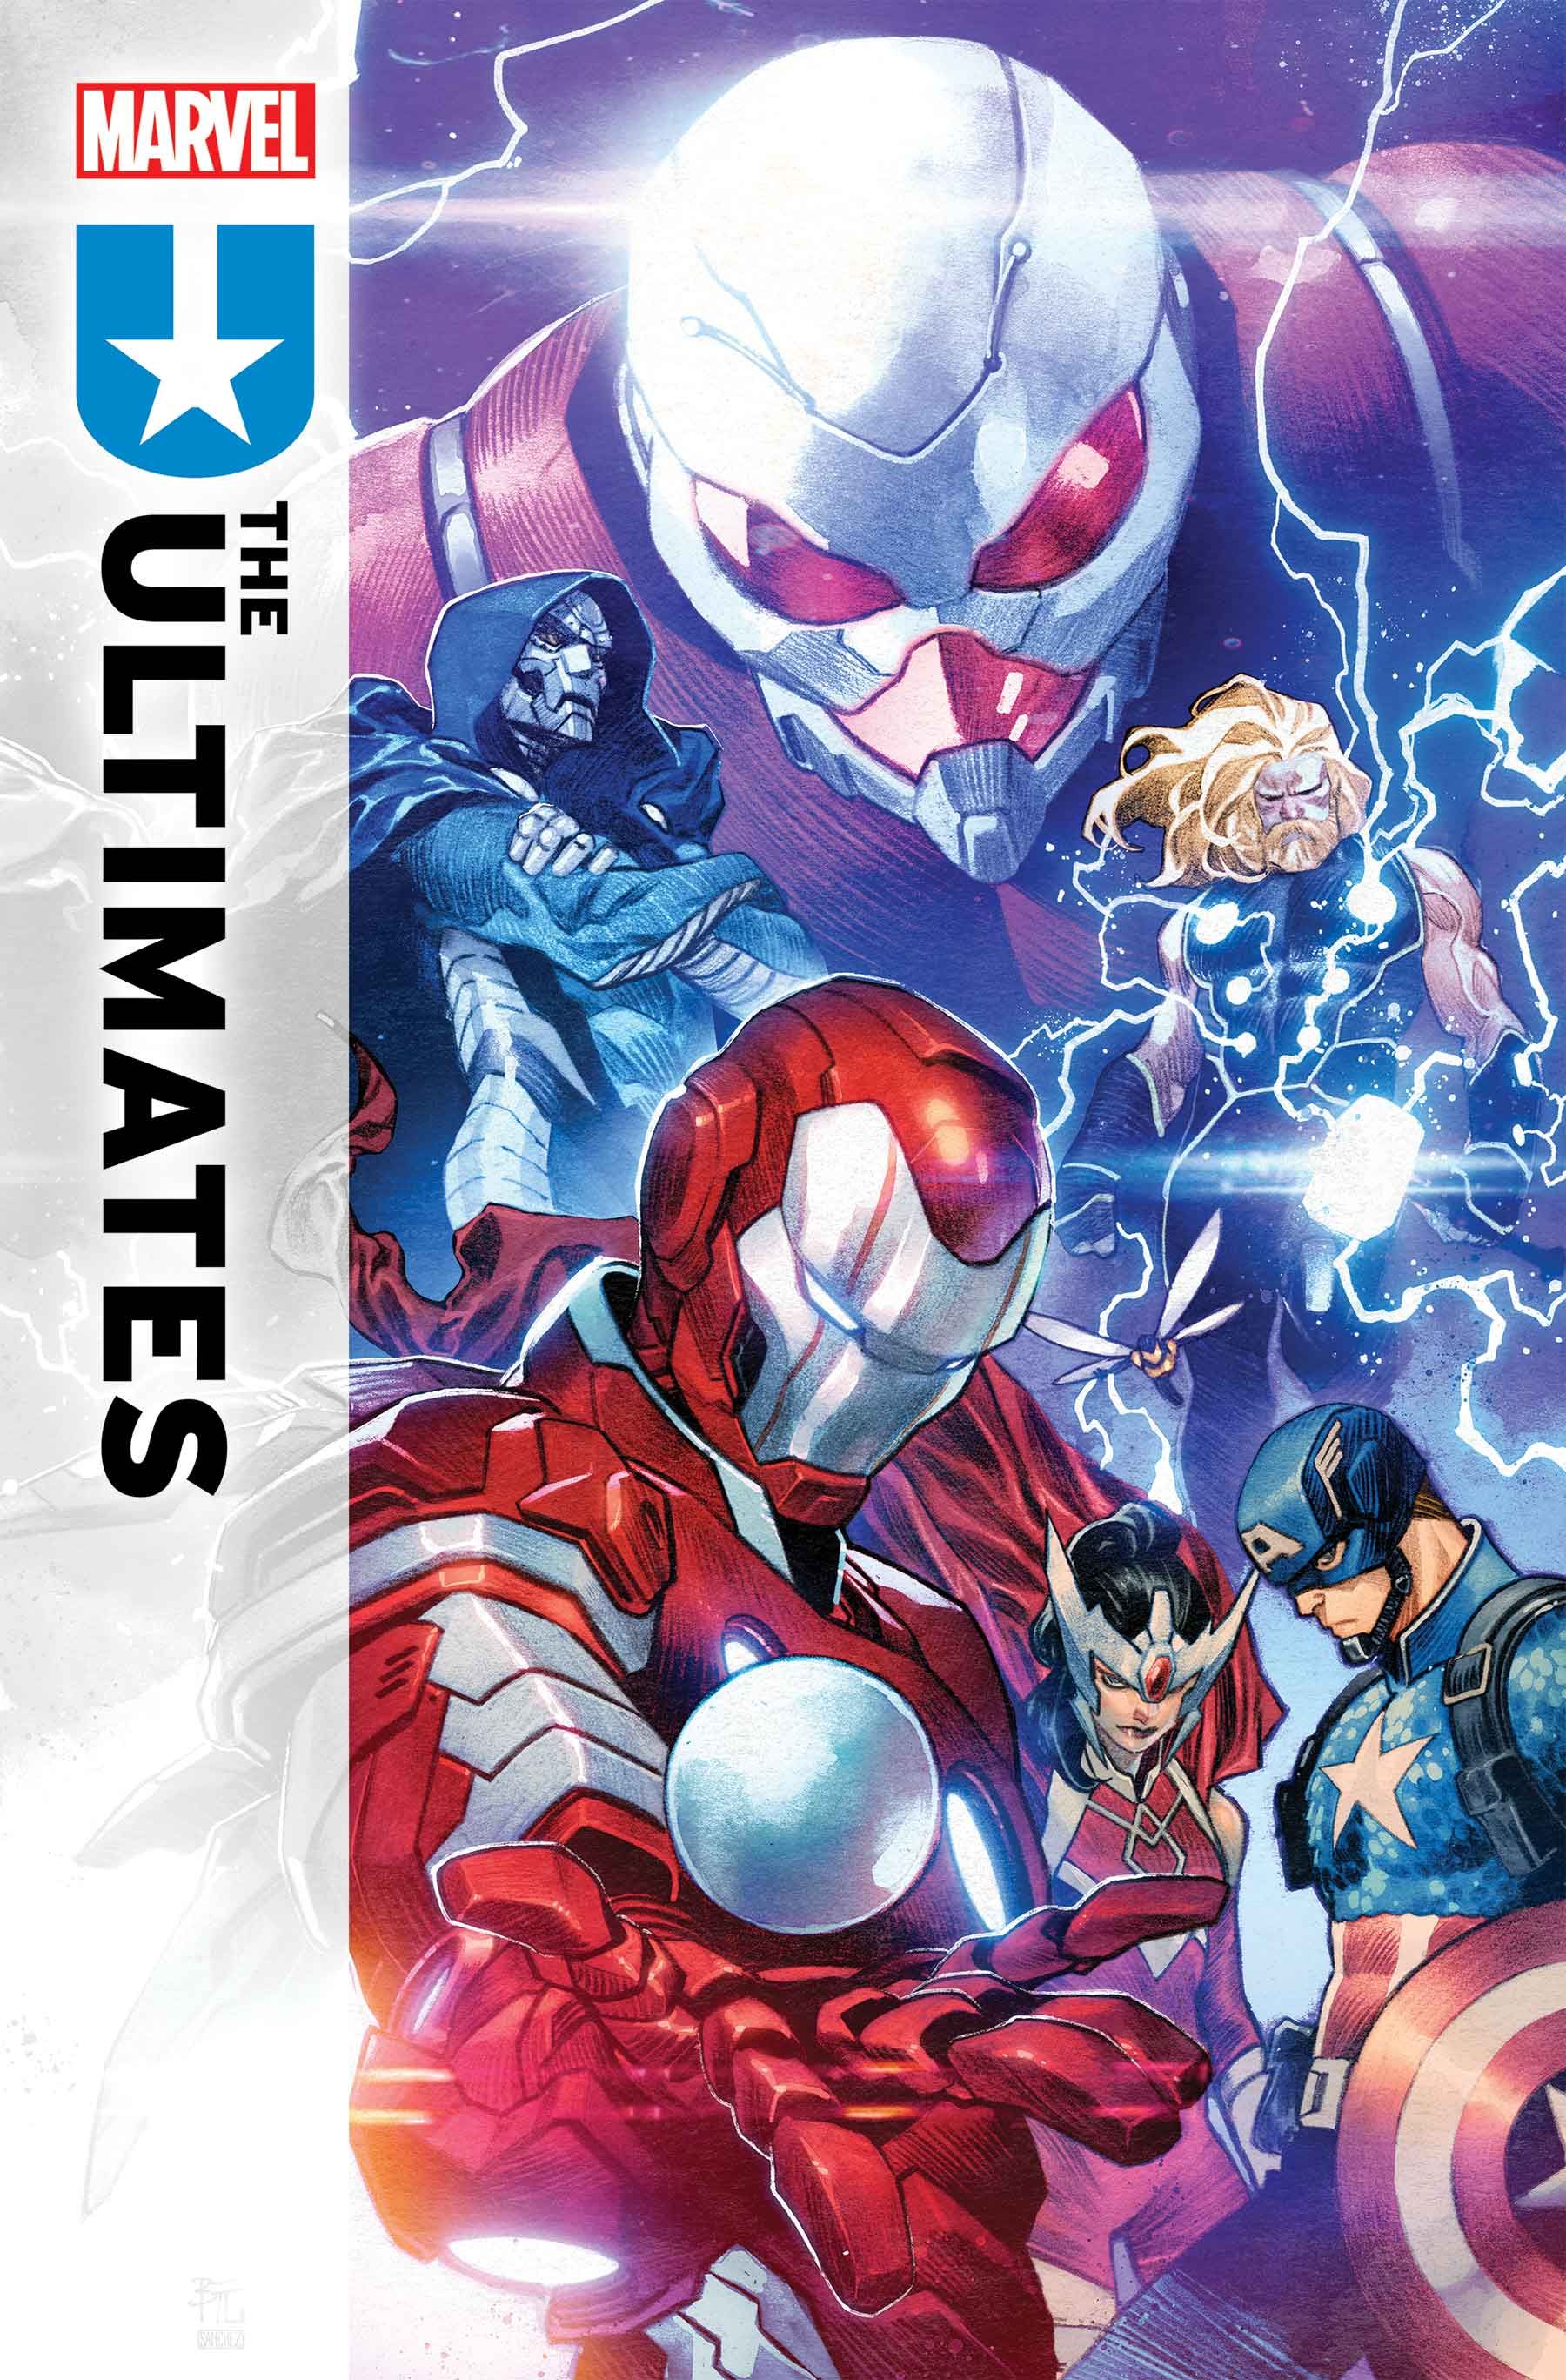 The cover of Ultimates #1